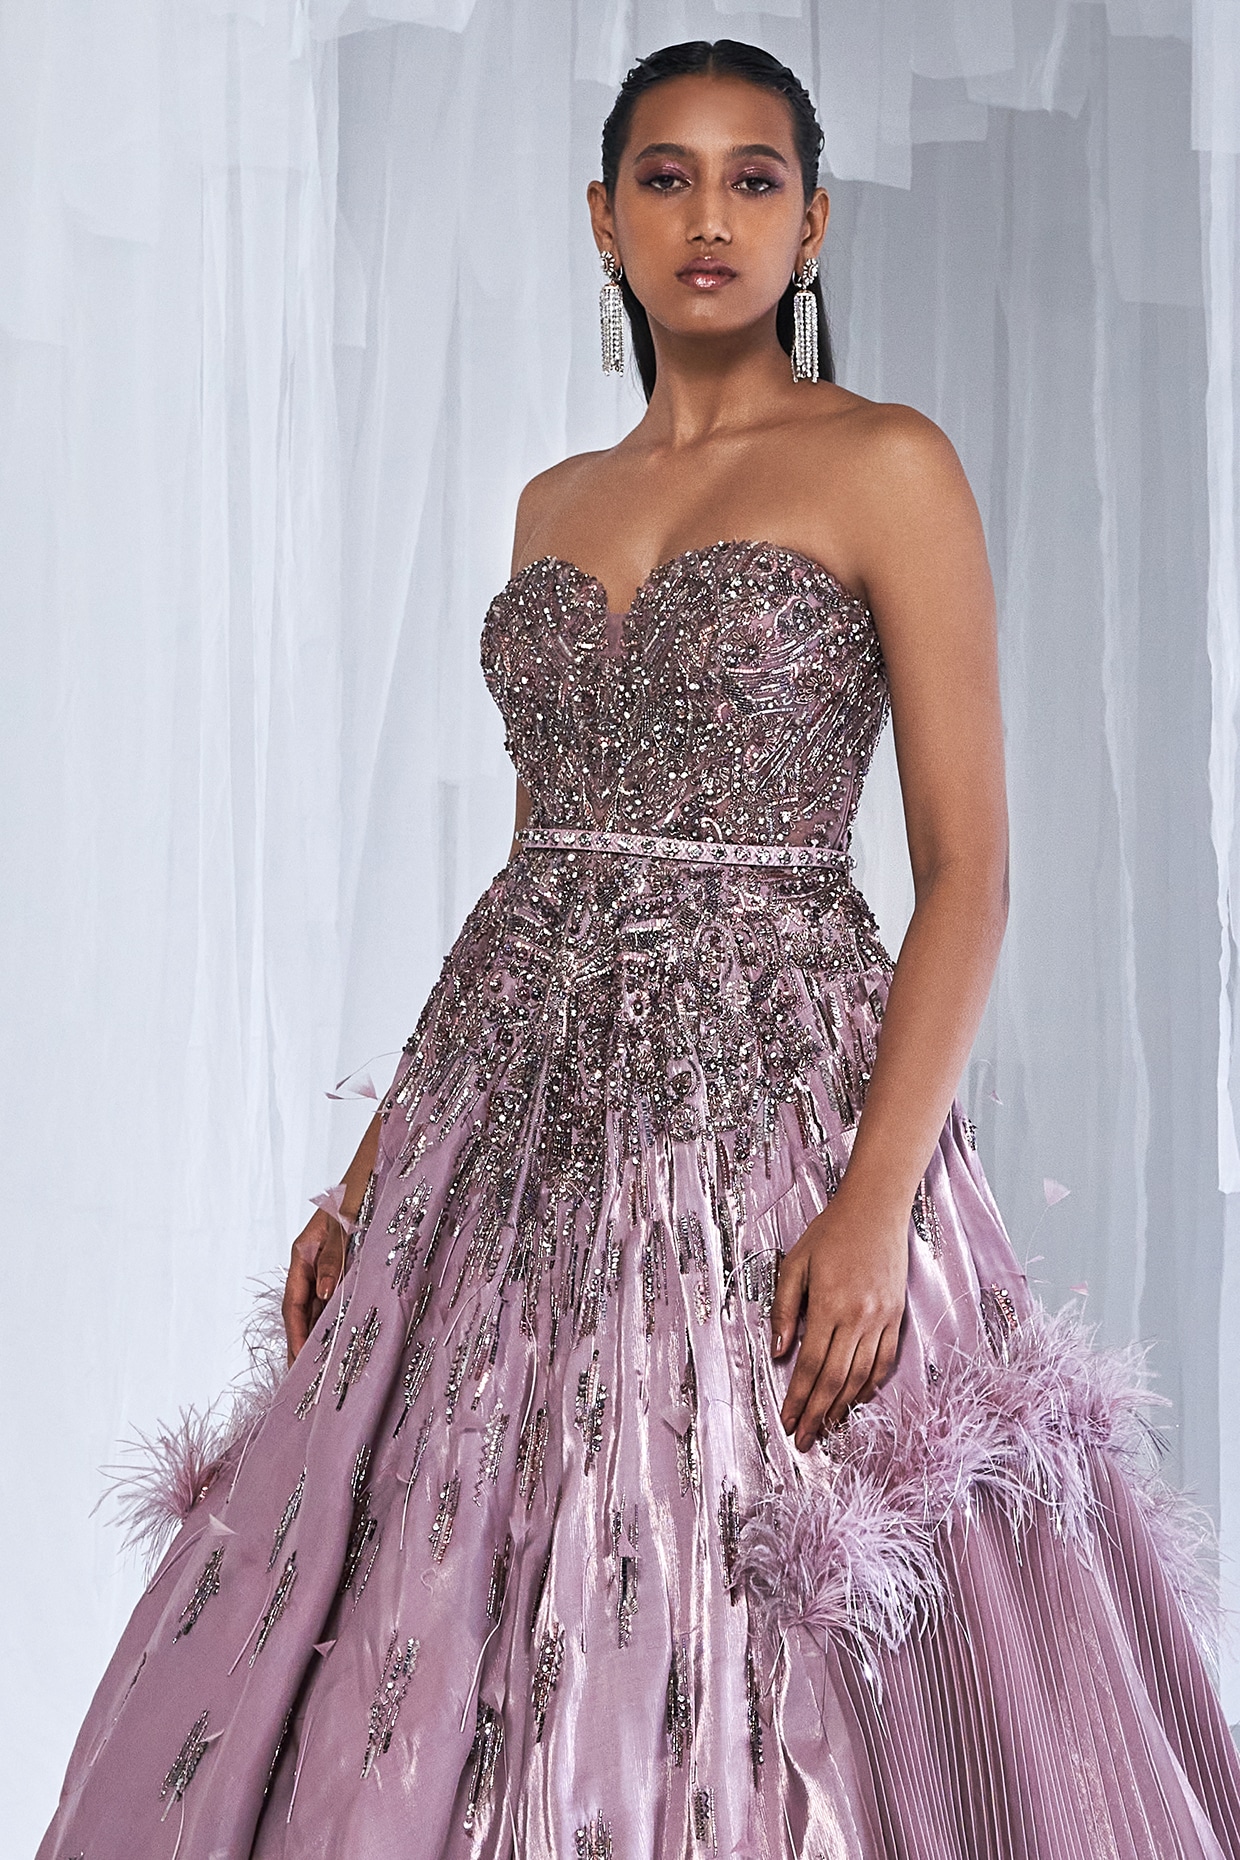 Dusky Mauve Sequin Embellished Gown with Cape